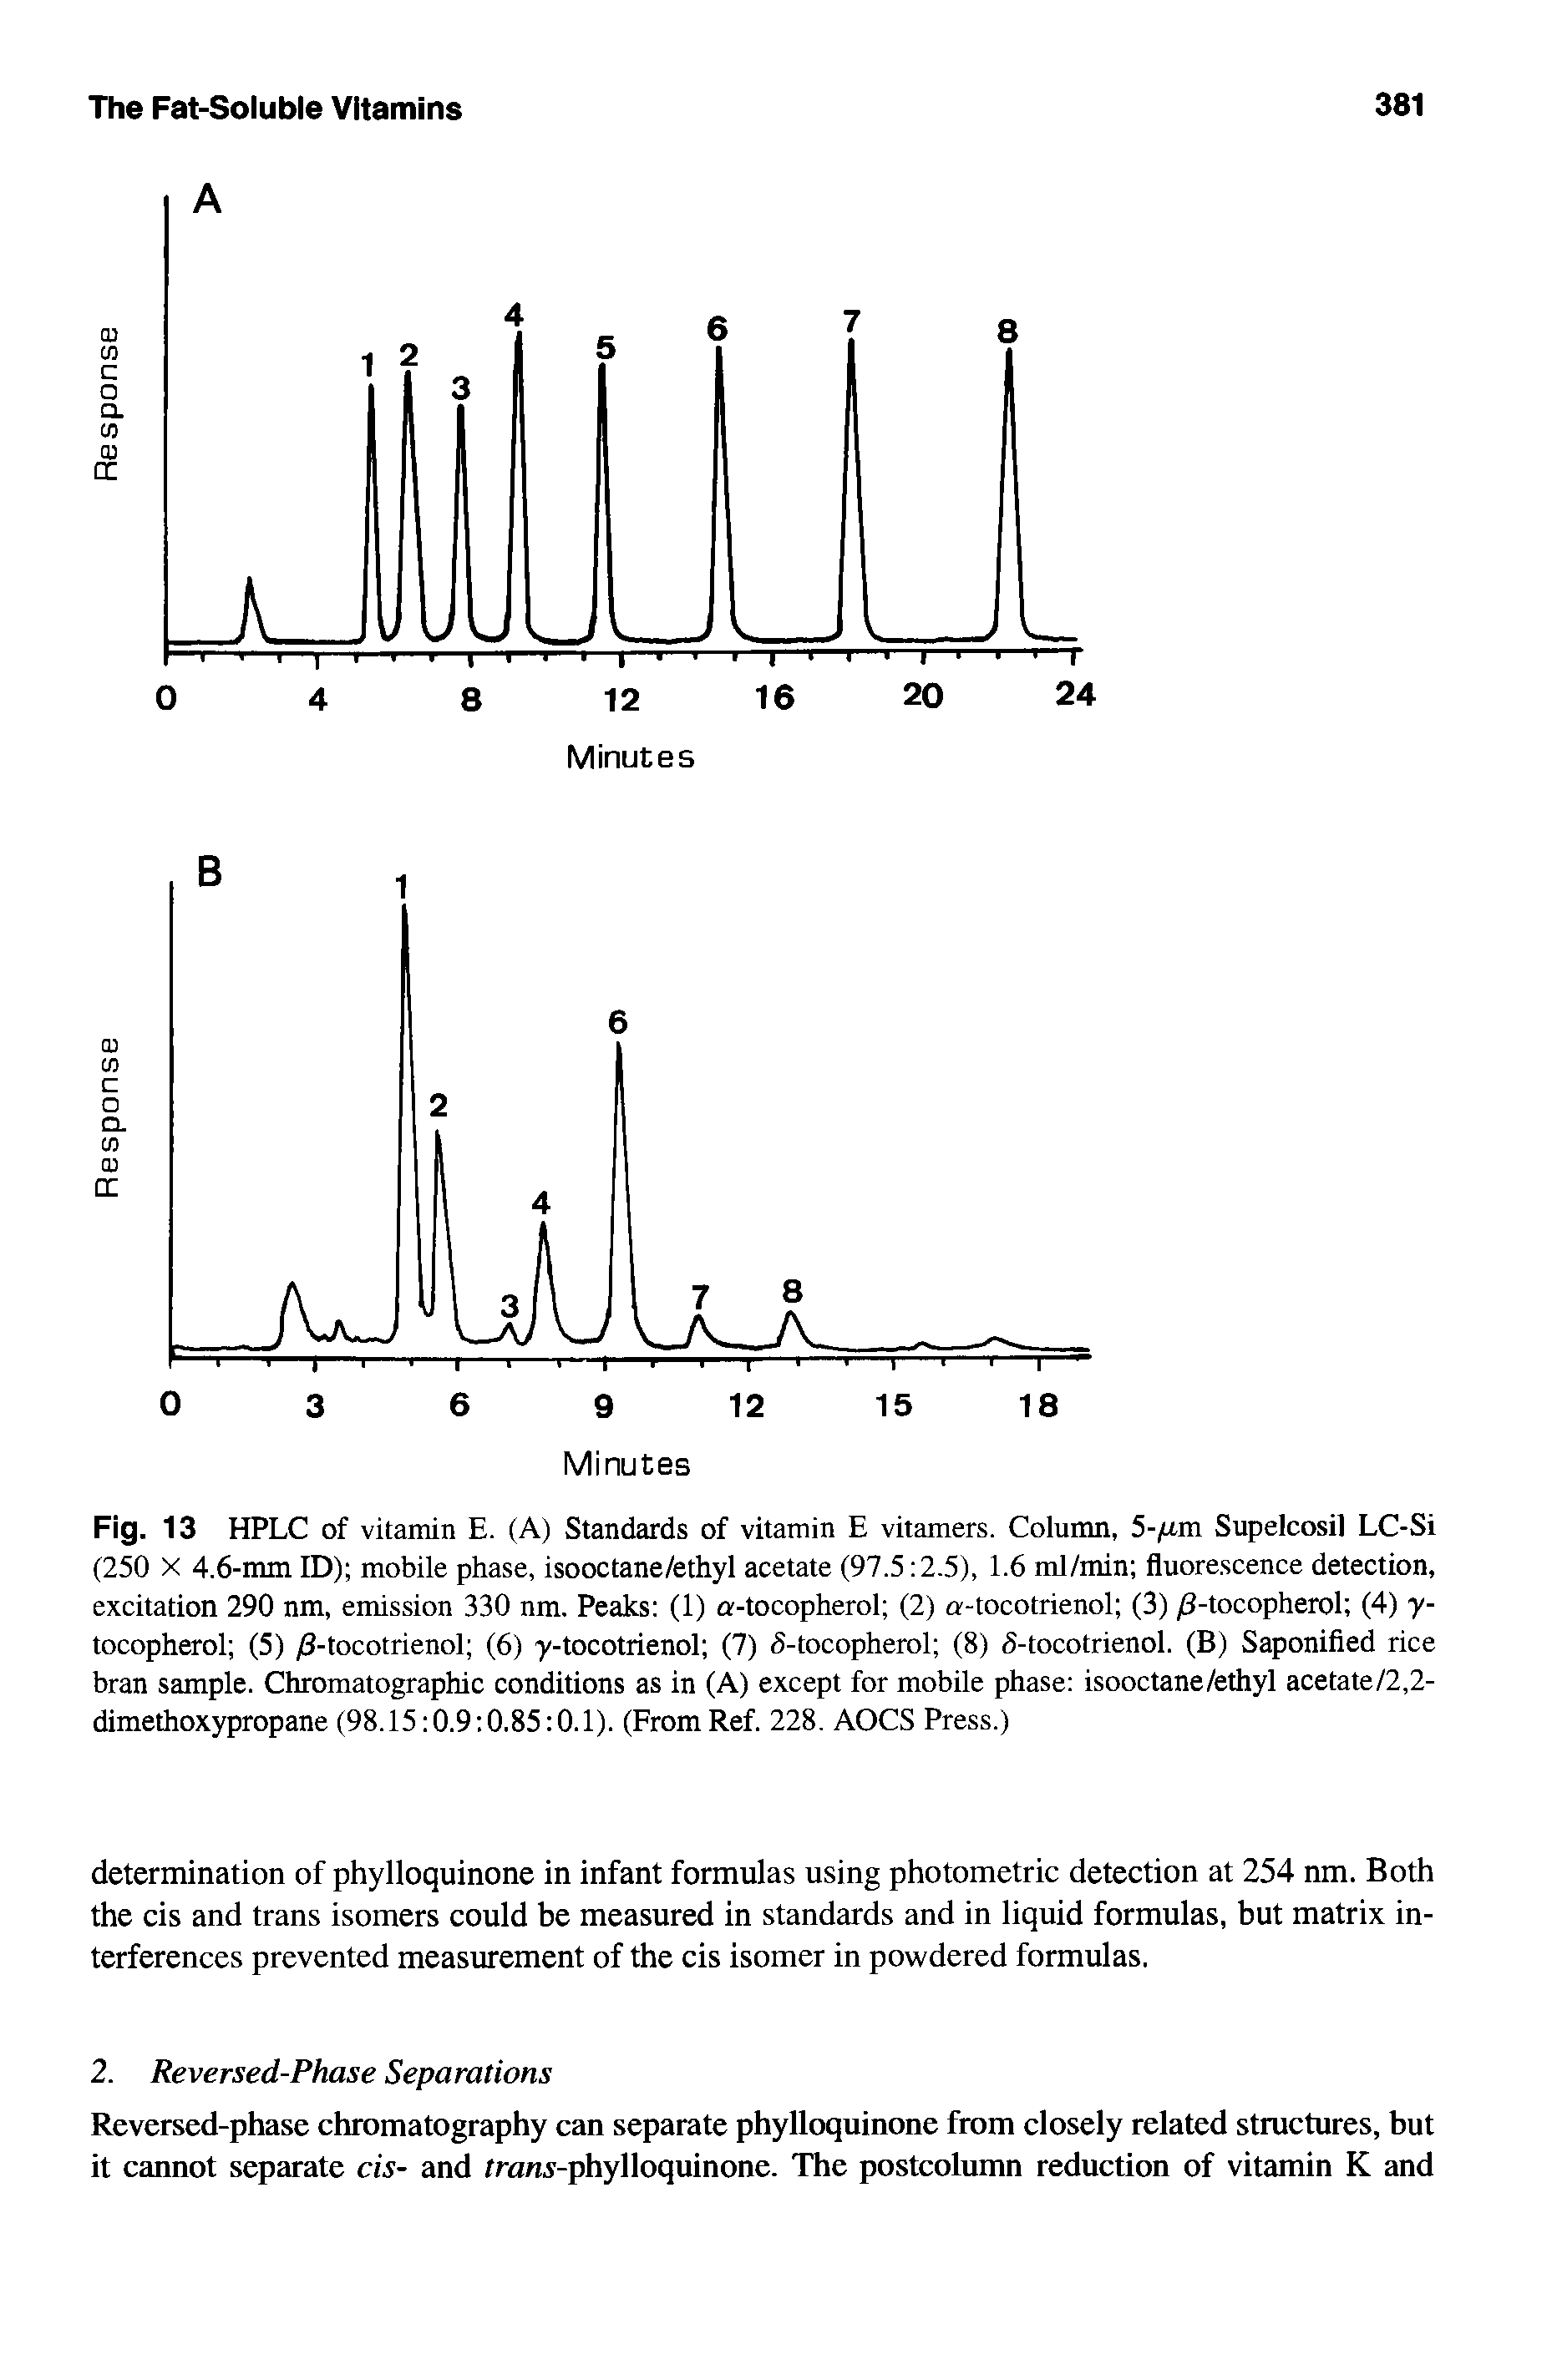 Fig. 13 HPLC of vitamin E. (A) Standards of vitamin E vitamers. Column, 5-p.m Supelcosil LC-Si (250 X 4.6-mm ID) mobile phase, isooctane/ethyl acetate (97.5 2.5), 1.6 ml/min fluorescence detection, excitation 290 nm, emission 330 nm. Peaks (1) a-tocopherol (2) a-tocotrienol (3) /3-tocopherol (4) y-tocopherol (5) /3-tocotrienol (6) y-tocotrienol (7) 5-tocopherol (8) 5-tocotrienol. (B) Saponified rice bran sample. Chromatographic conditions as in (A) except for mobile phase isooctane/ethyl acetate/2,2-dimethoxypropane (98.15 0.9 0.85 0.1). (From Ref. 228. AOCS Press.)...